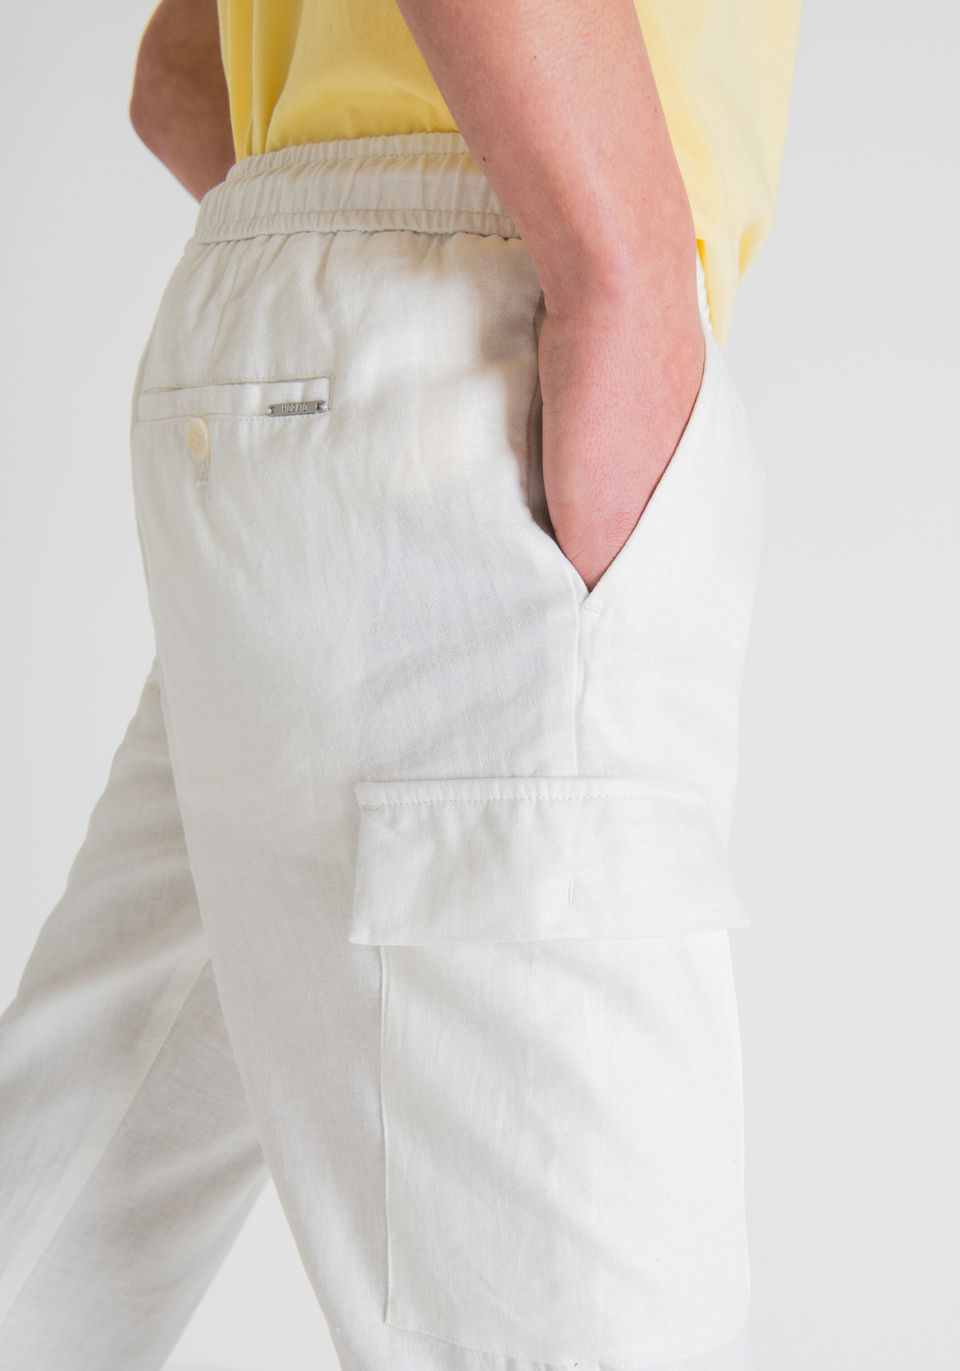 LINEN BLEND CARROT-FIT TROUSERS WITH SIDE POCKETS AND DRAWSTRING - Antony Morato Online Shop